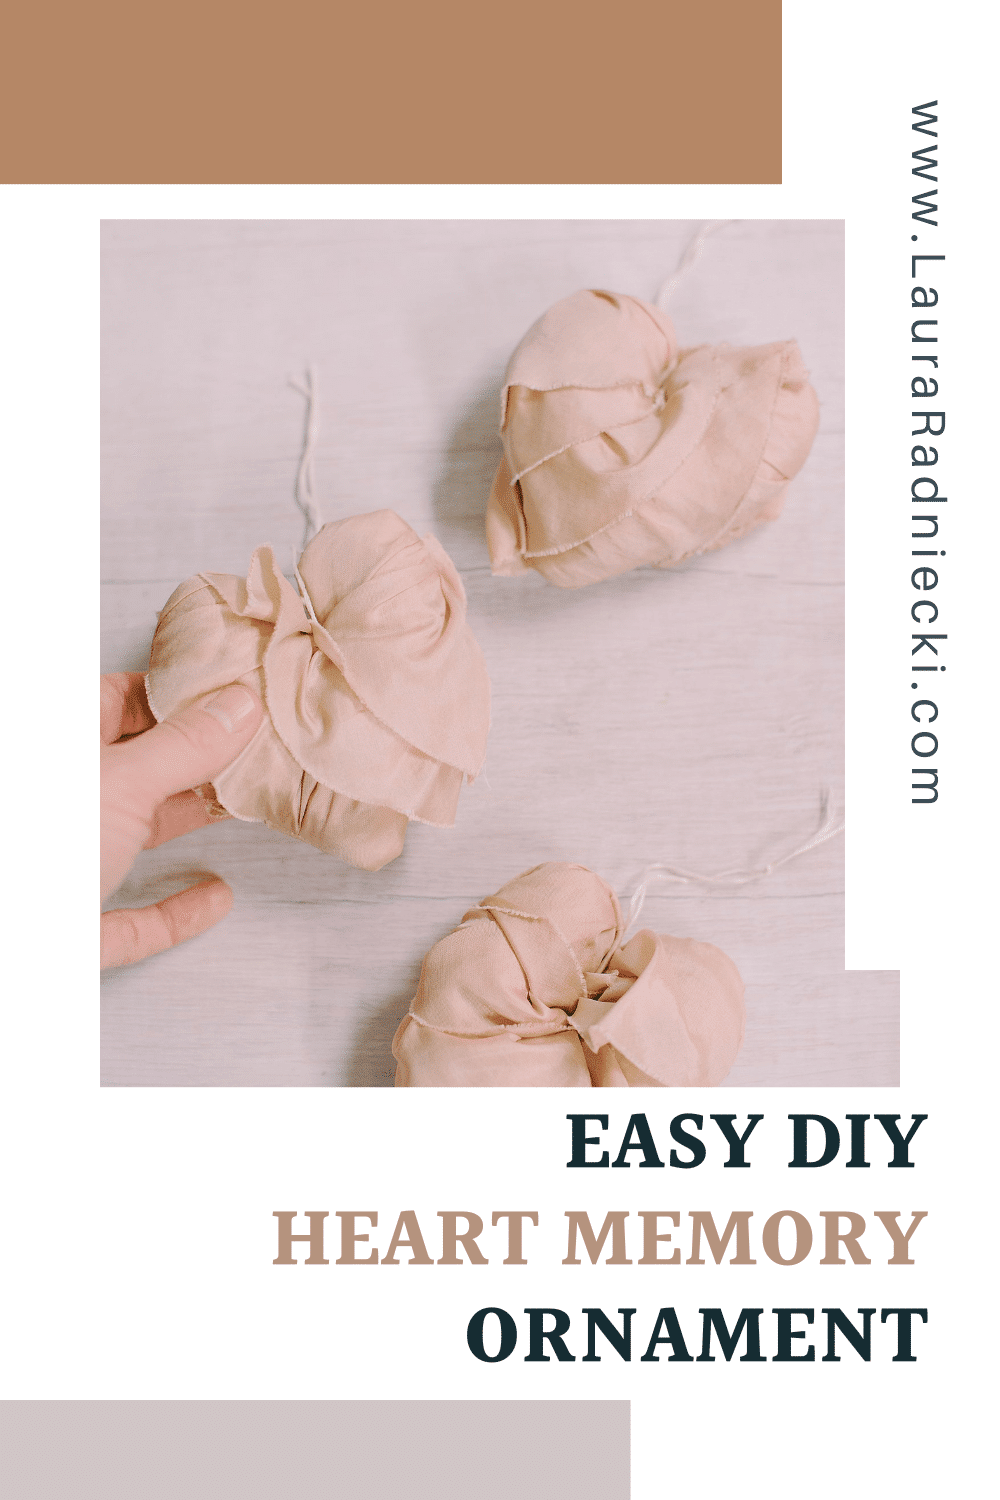 How to Make a Memory Heart Ornament